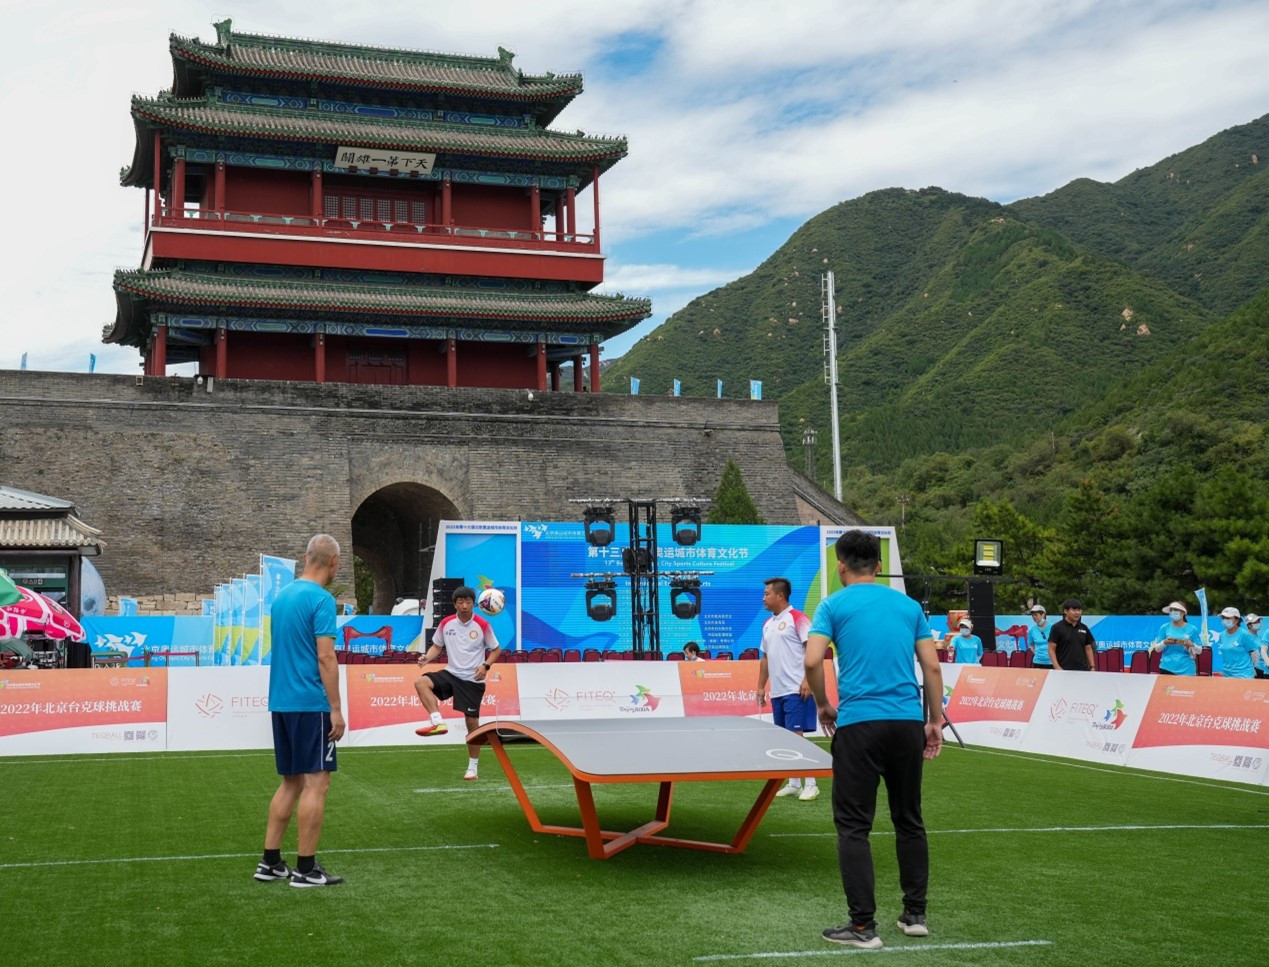 Hundreds contest Beijing Teqball Challenge in Great Wall of China's shadow